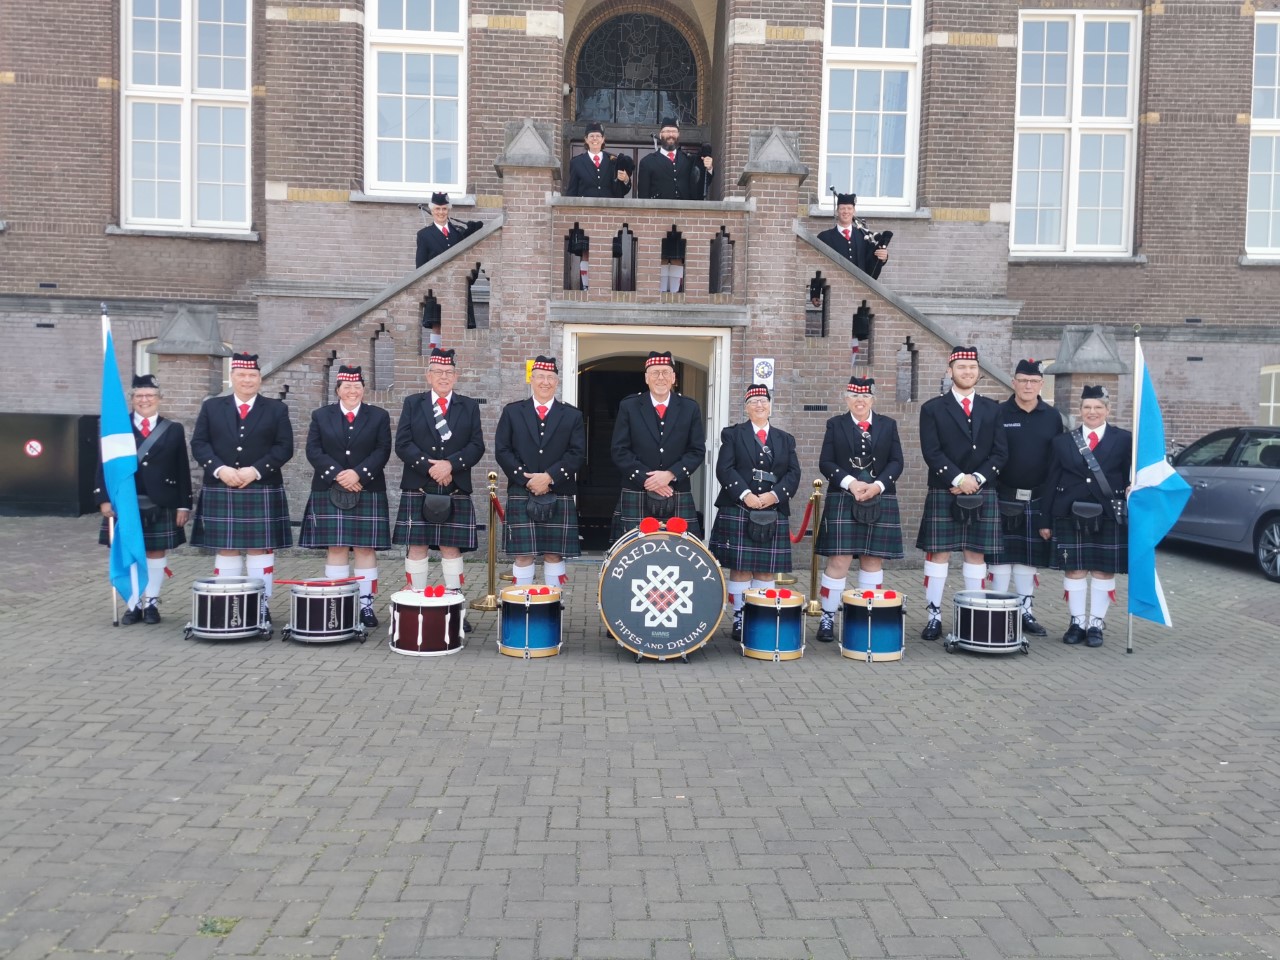 Breda City Pipe and drums